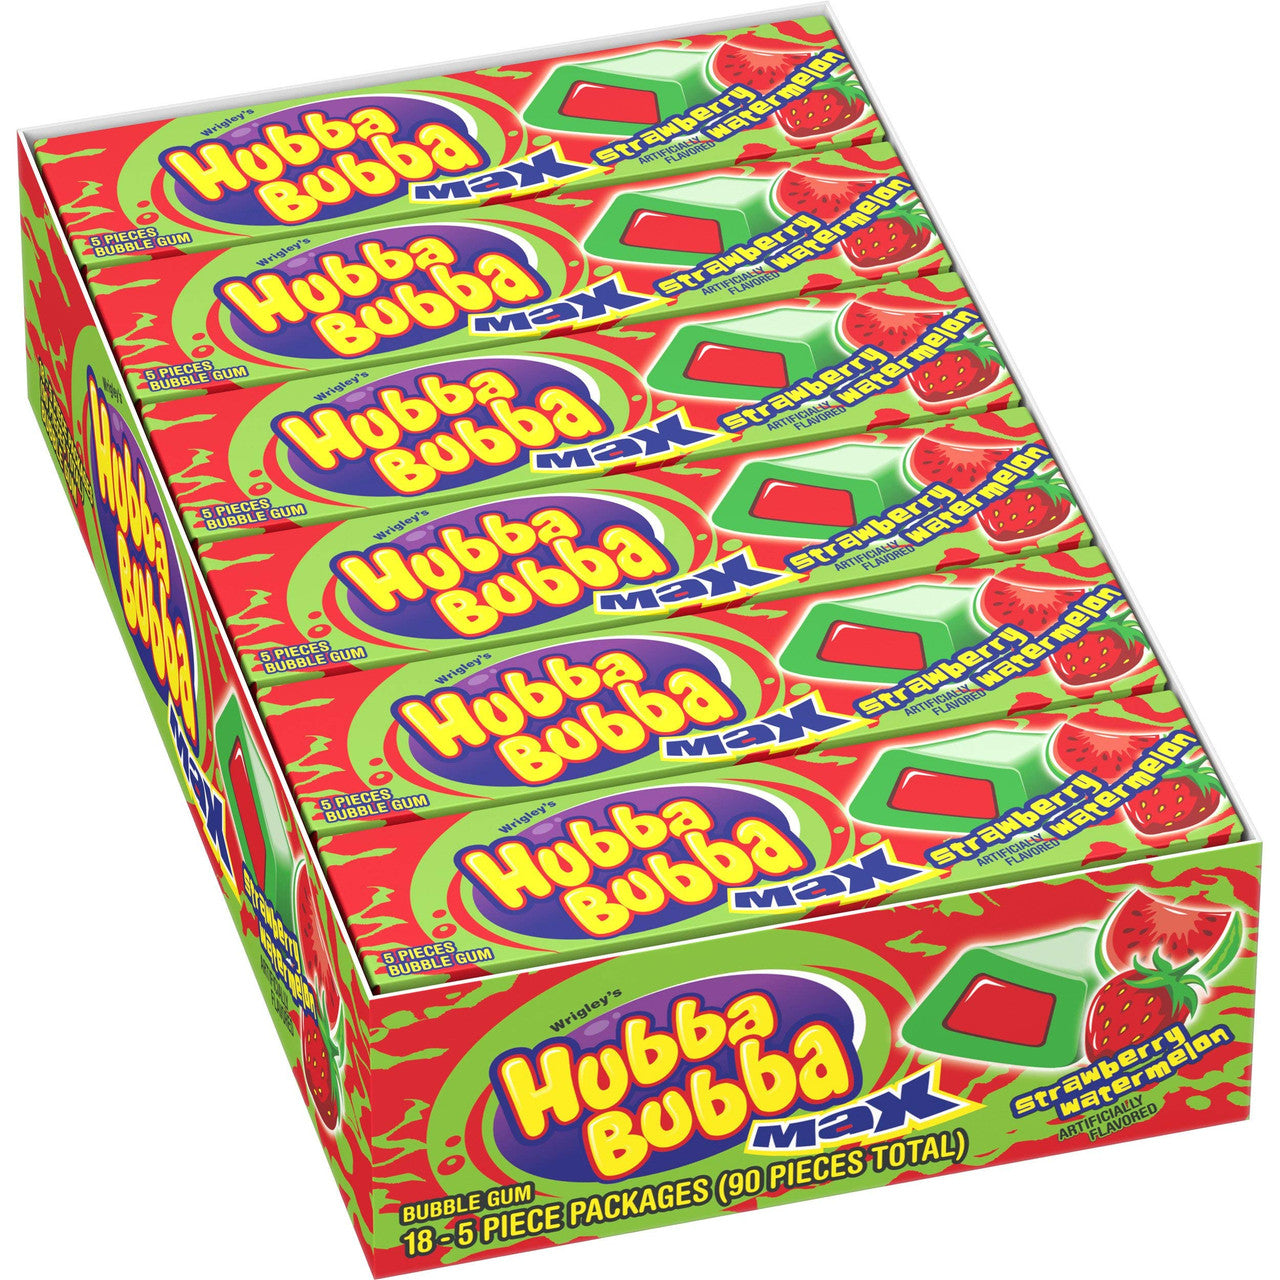 Hubba Bubba Max Outrageous Original Gum, 5 Count (Pack of 18)